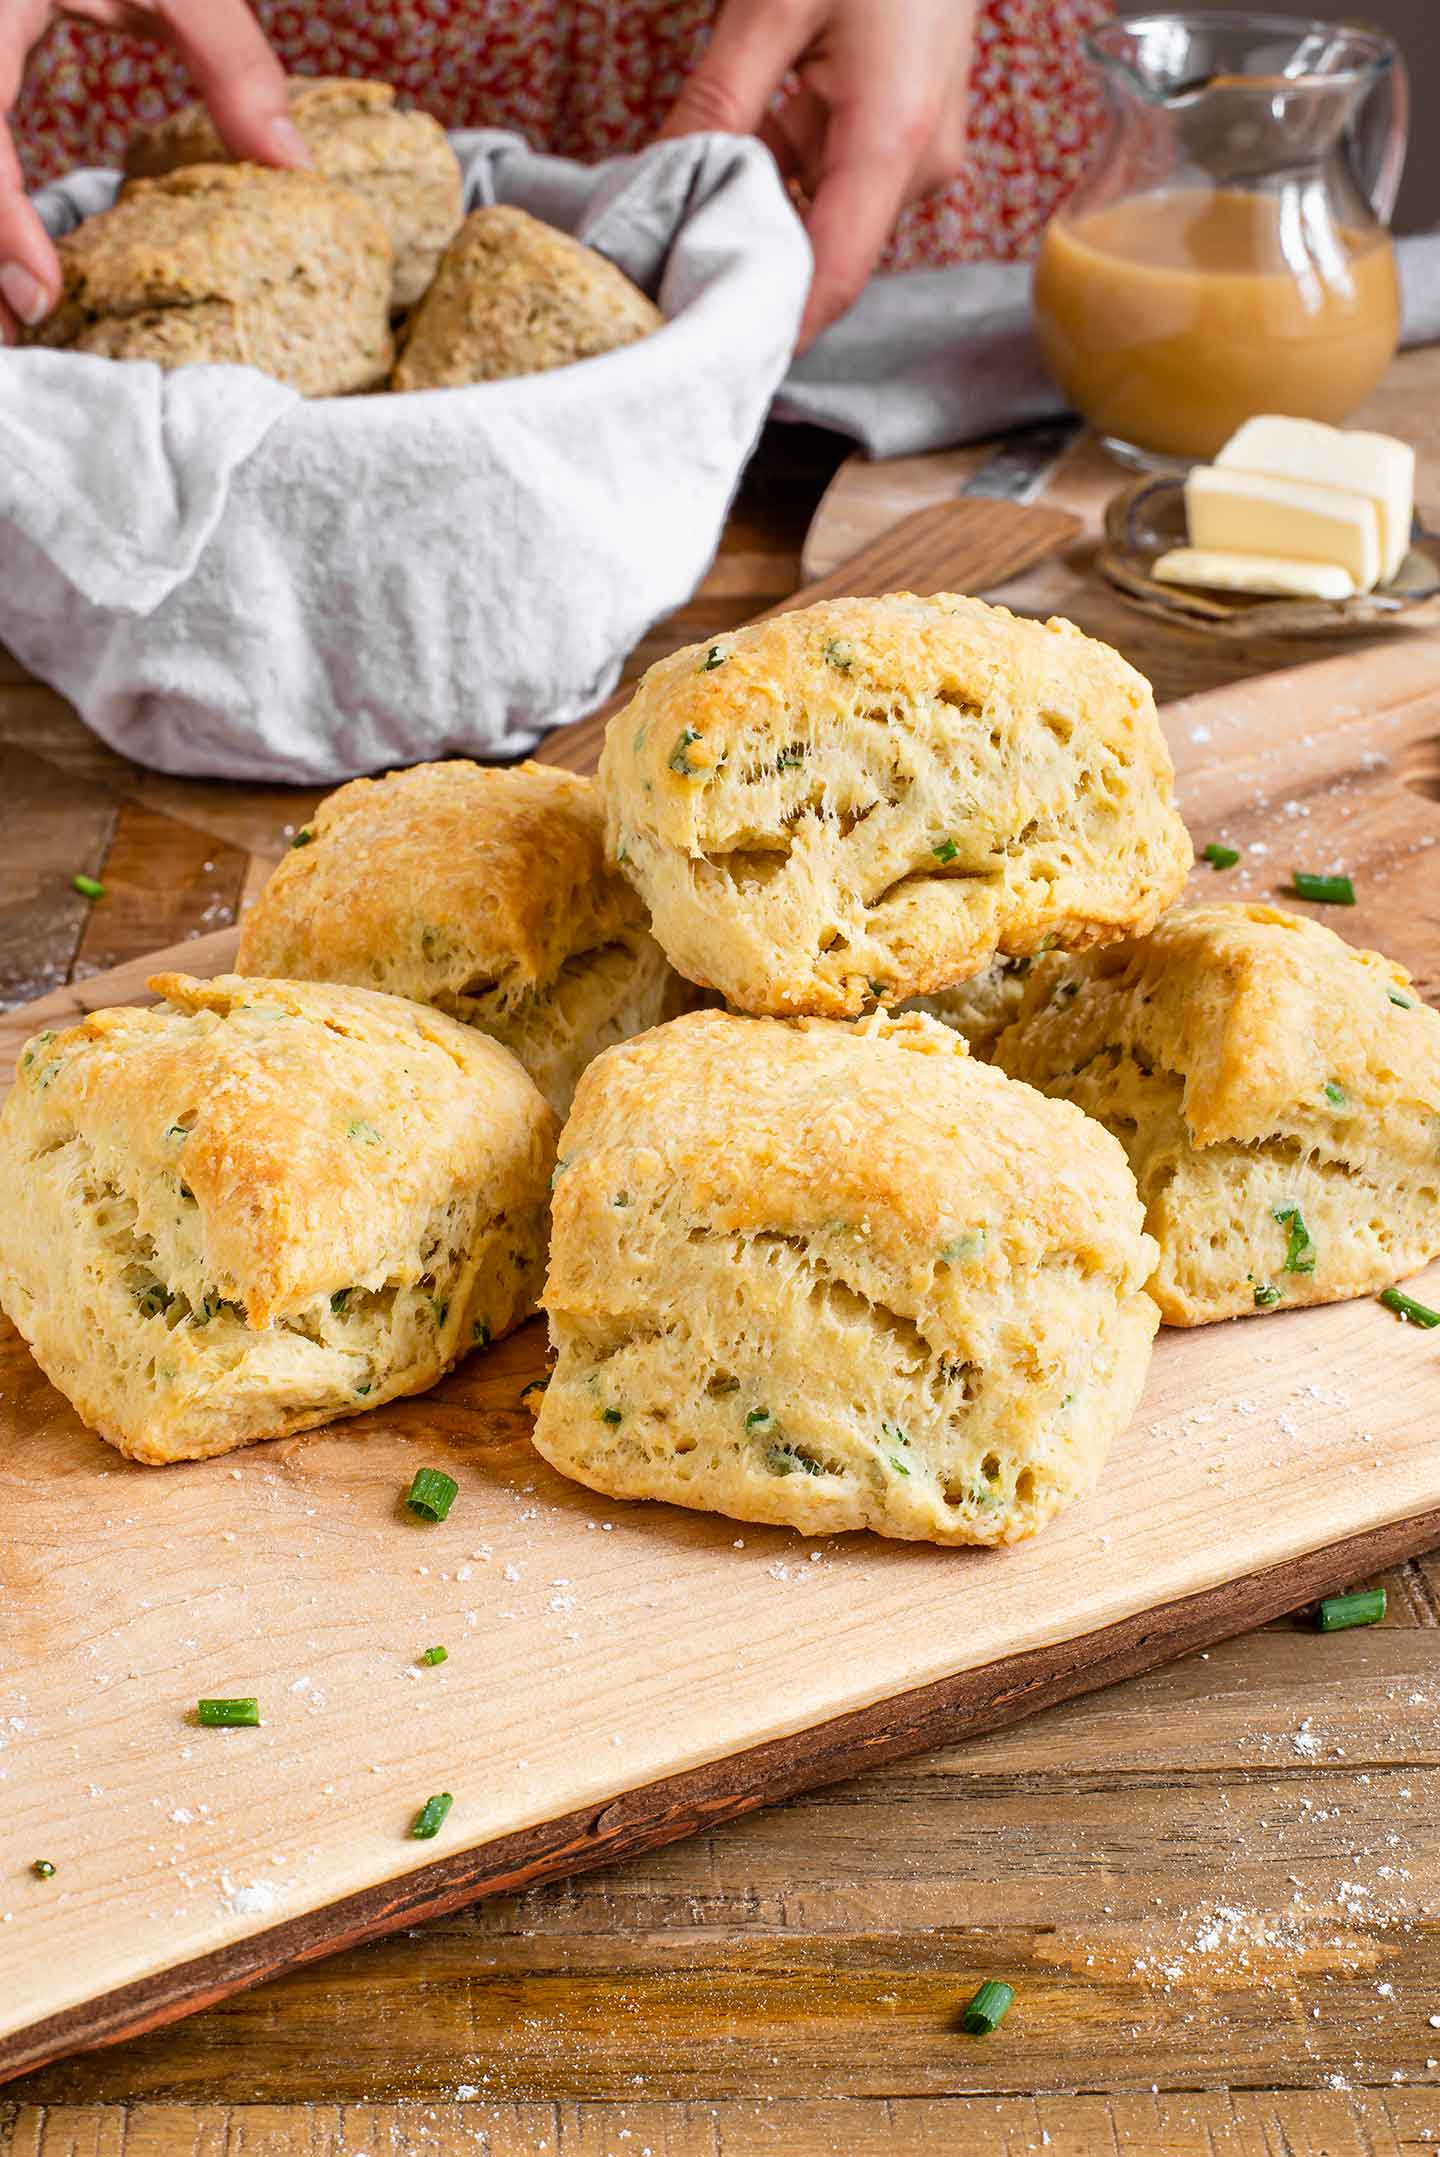 Side view of flaky vegan biscuits piled on top of each other. The biscuits are golden and the layers are visibly pulling away from each other. Fresh chives are speckled throughout the biscuits.